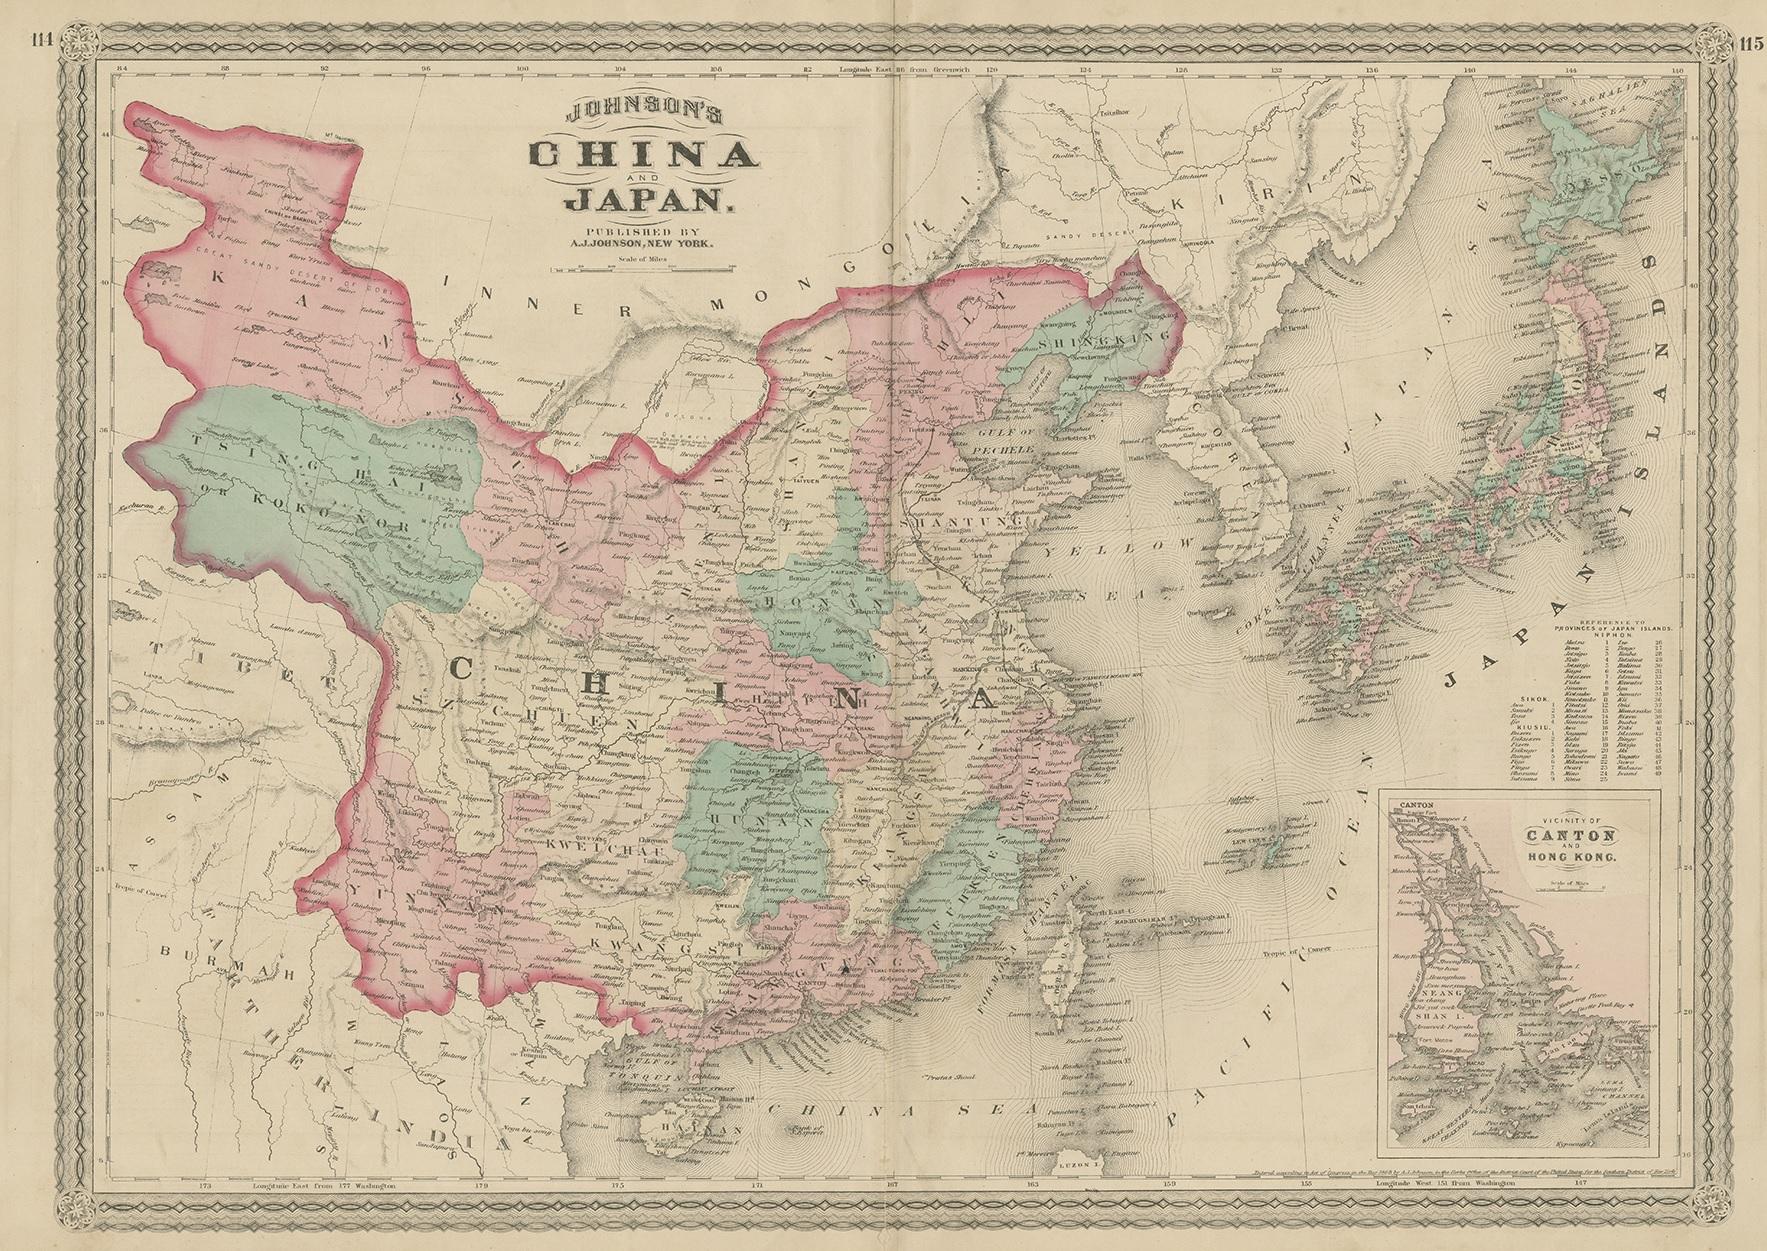 Antique map titled 'Johnson's China and Japan'. Map of China and Japan, with an inset map of the vicinity of Canton and Hong Kong. This map originates from 'Johnson's New Illustrated Family Atlas of the World' by A.J. Johnson. Published 1872.